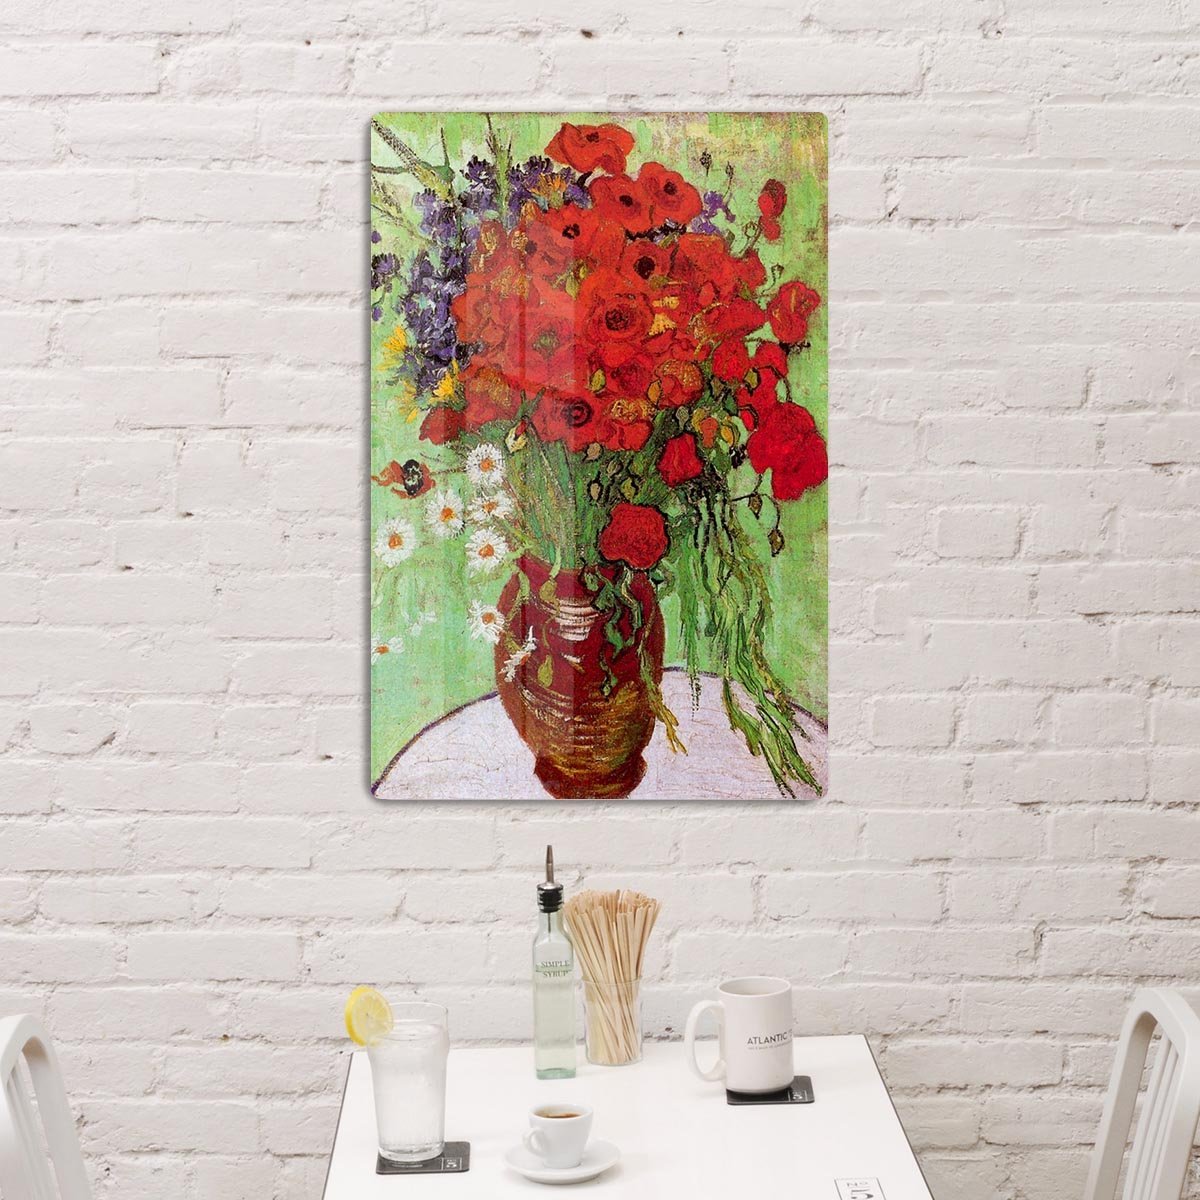 Still Life Red Poppies and Daisies by Van Gogh HD Metal Print